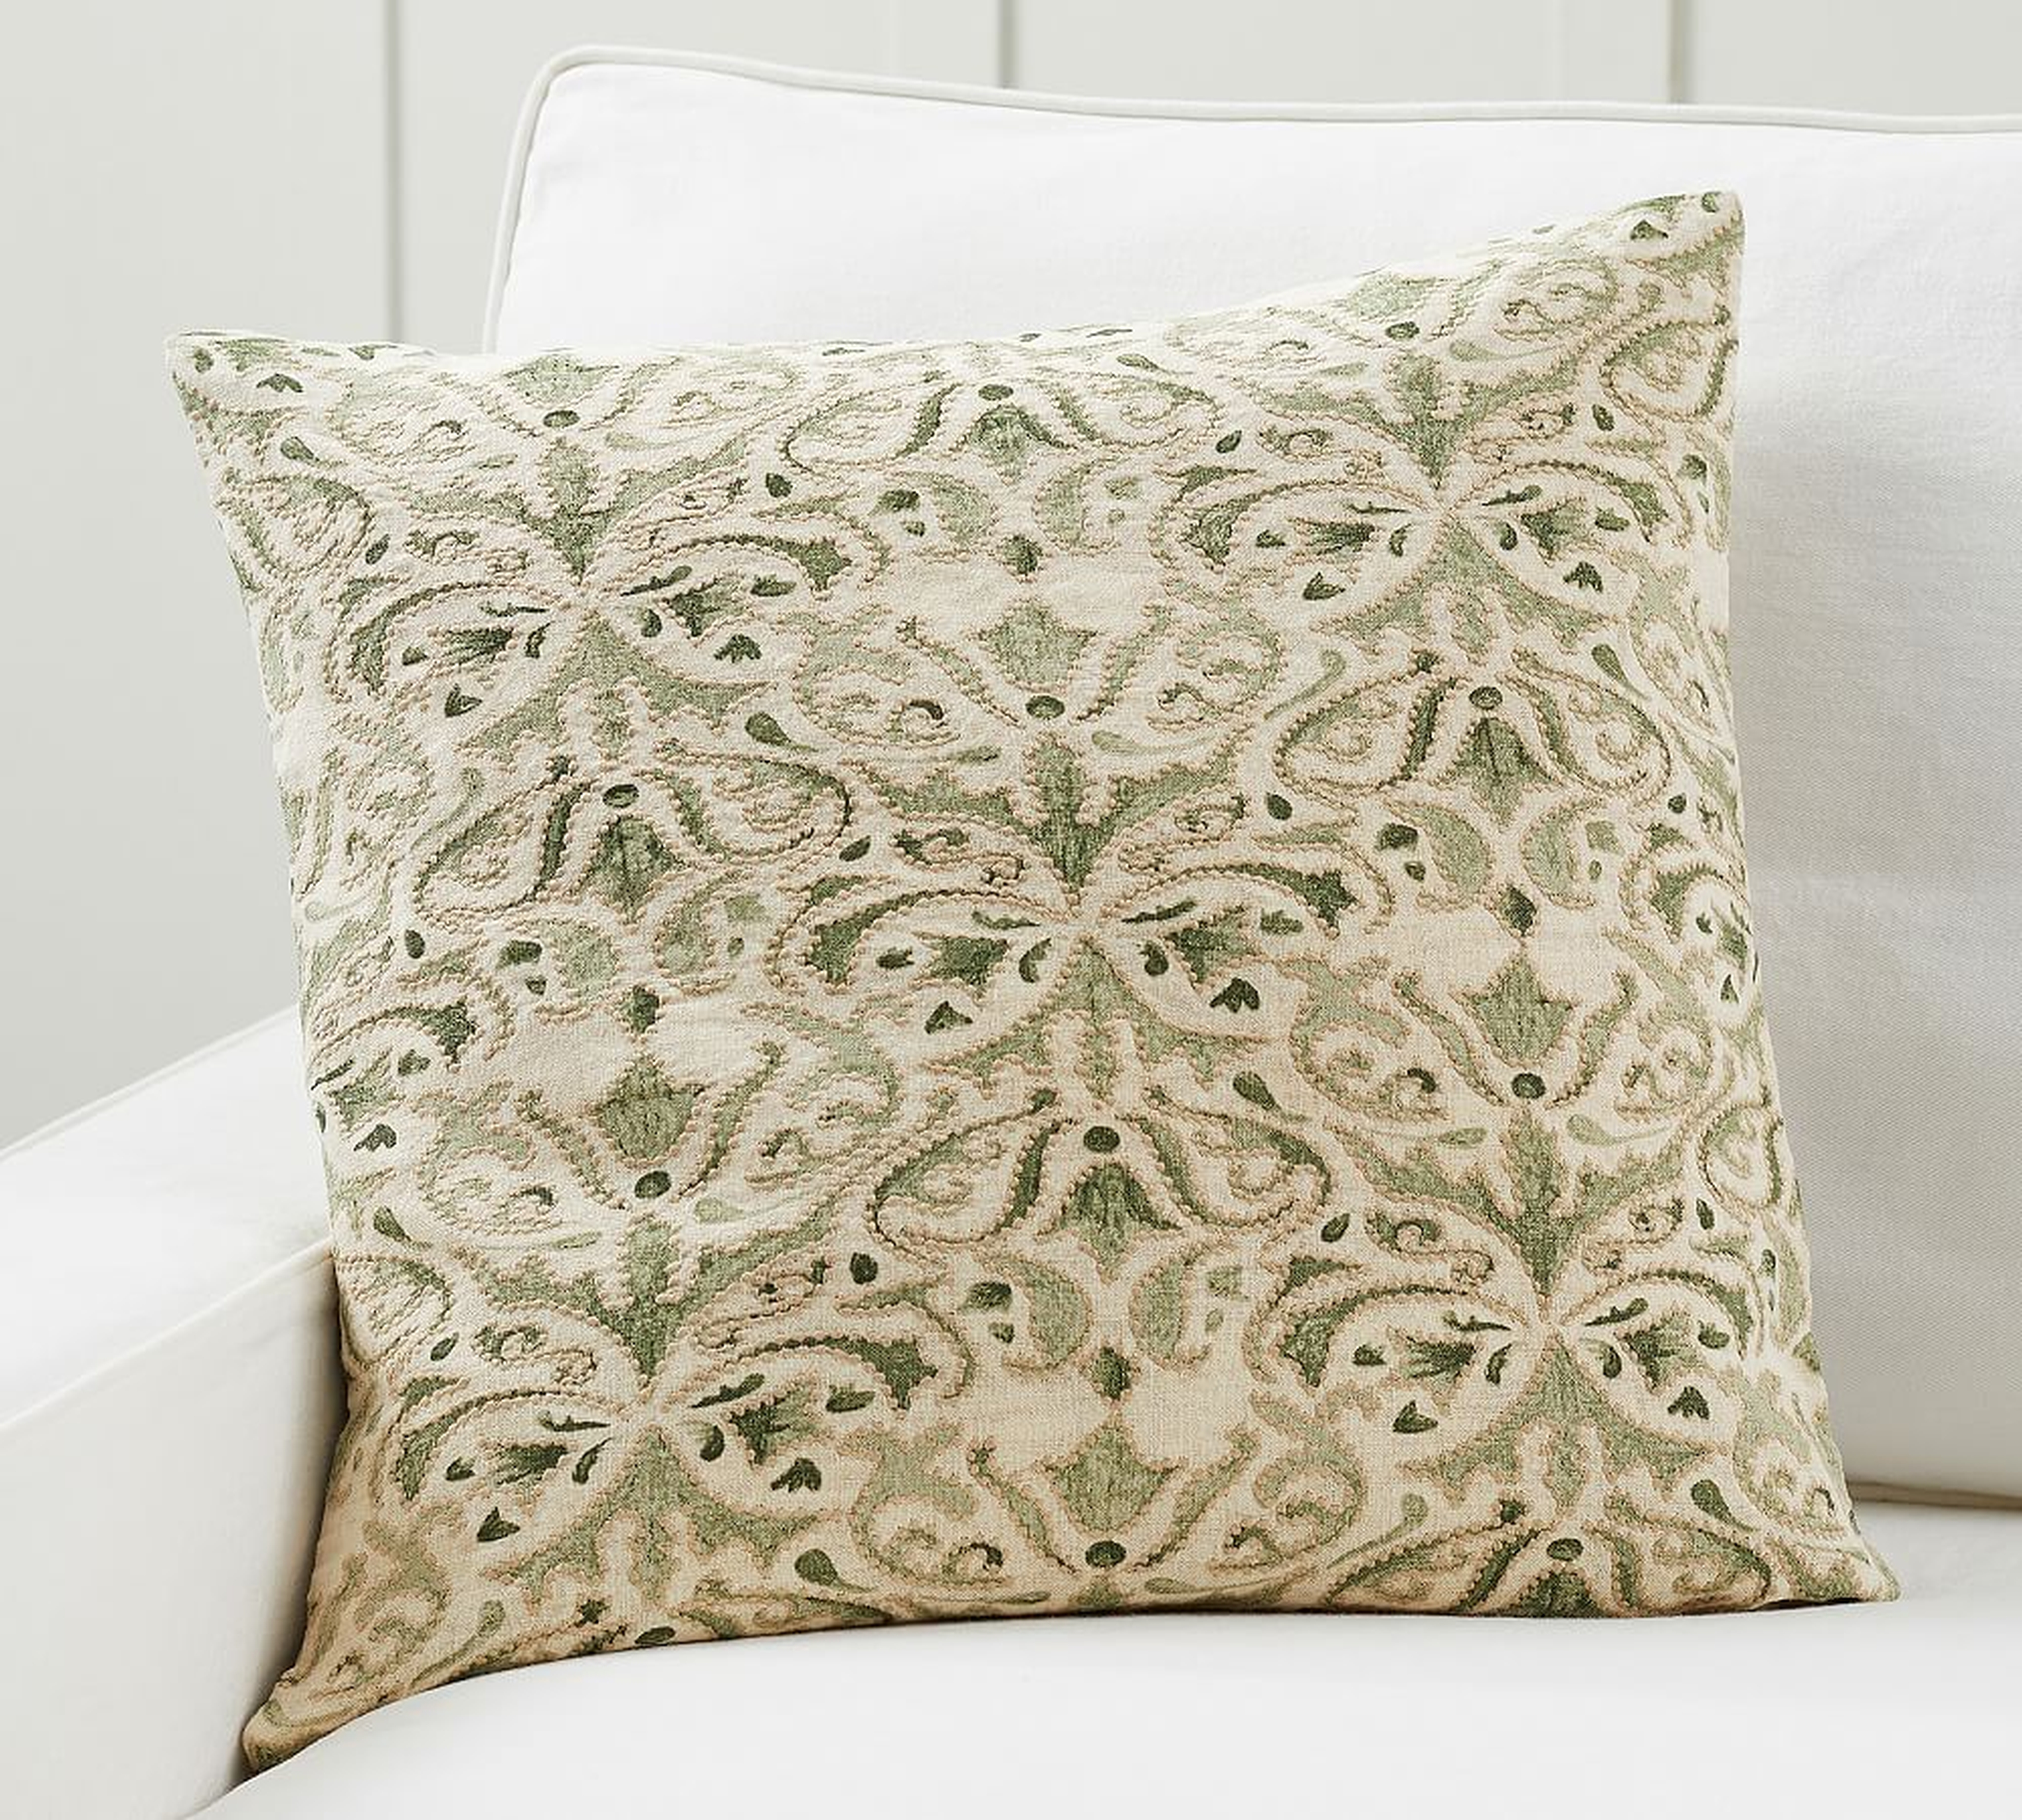 Reilley Embroidered Pillow Cover, 22", Sage - Pottery Barn